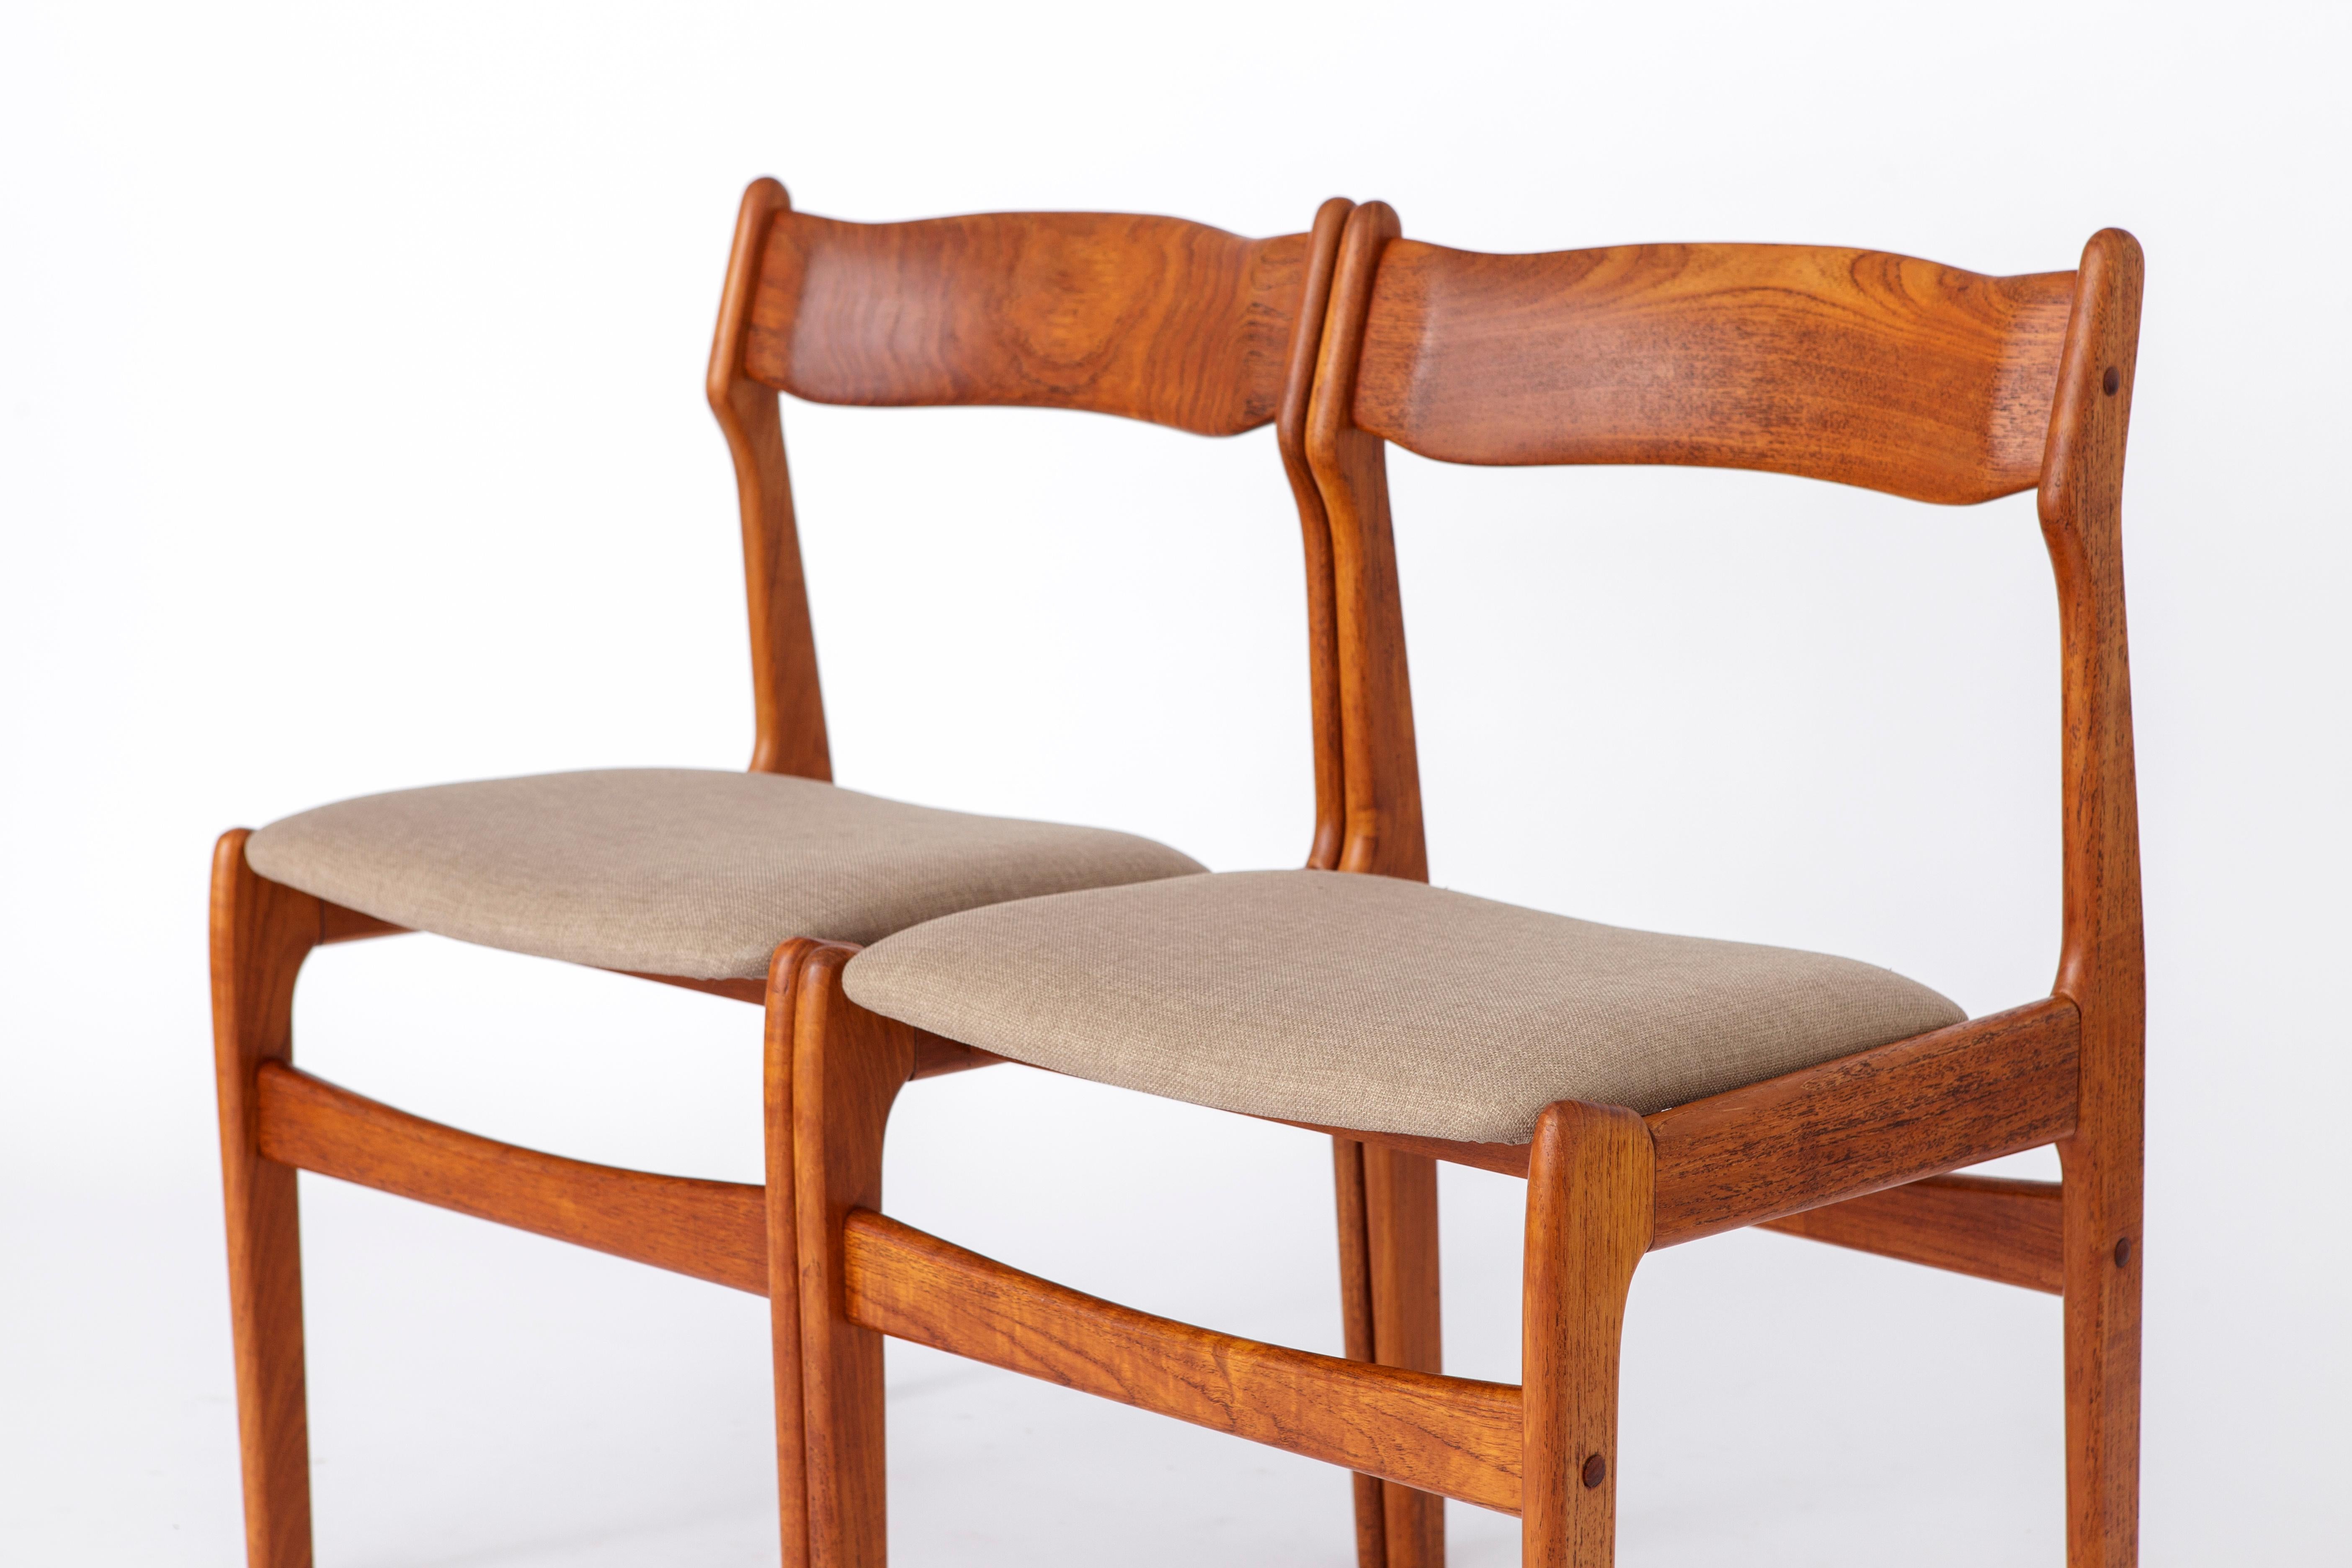 2 of 5 Vintage Danish Chairs 1960s - Walnut Chair Frame In Good Condition For Sale In Hannover, DE